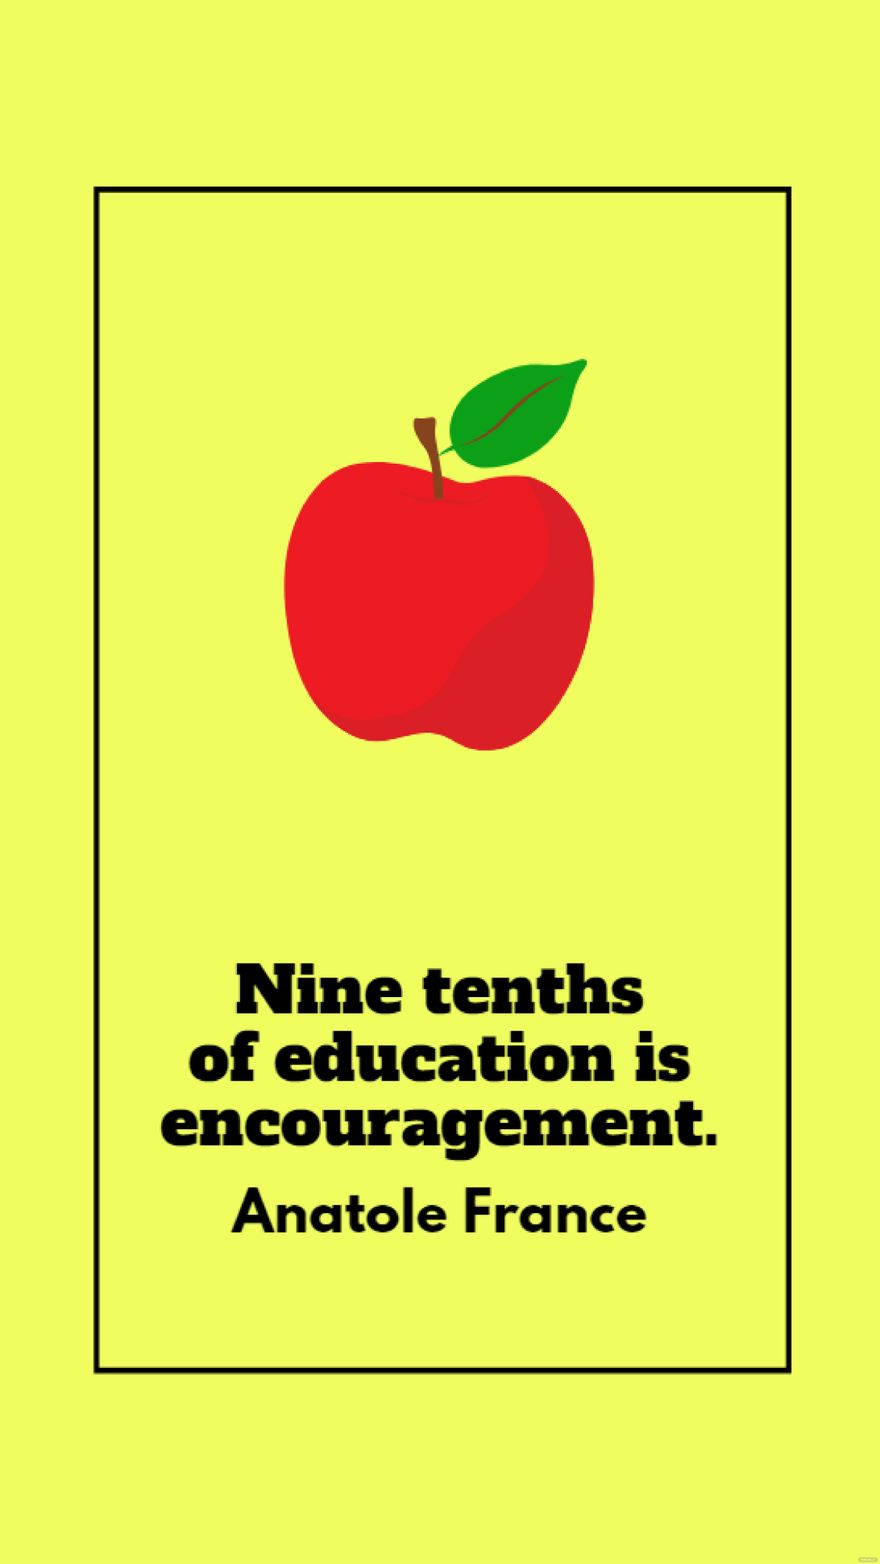 Free Anatole France - Nine tenths of education is encouragement. in JPG